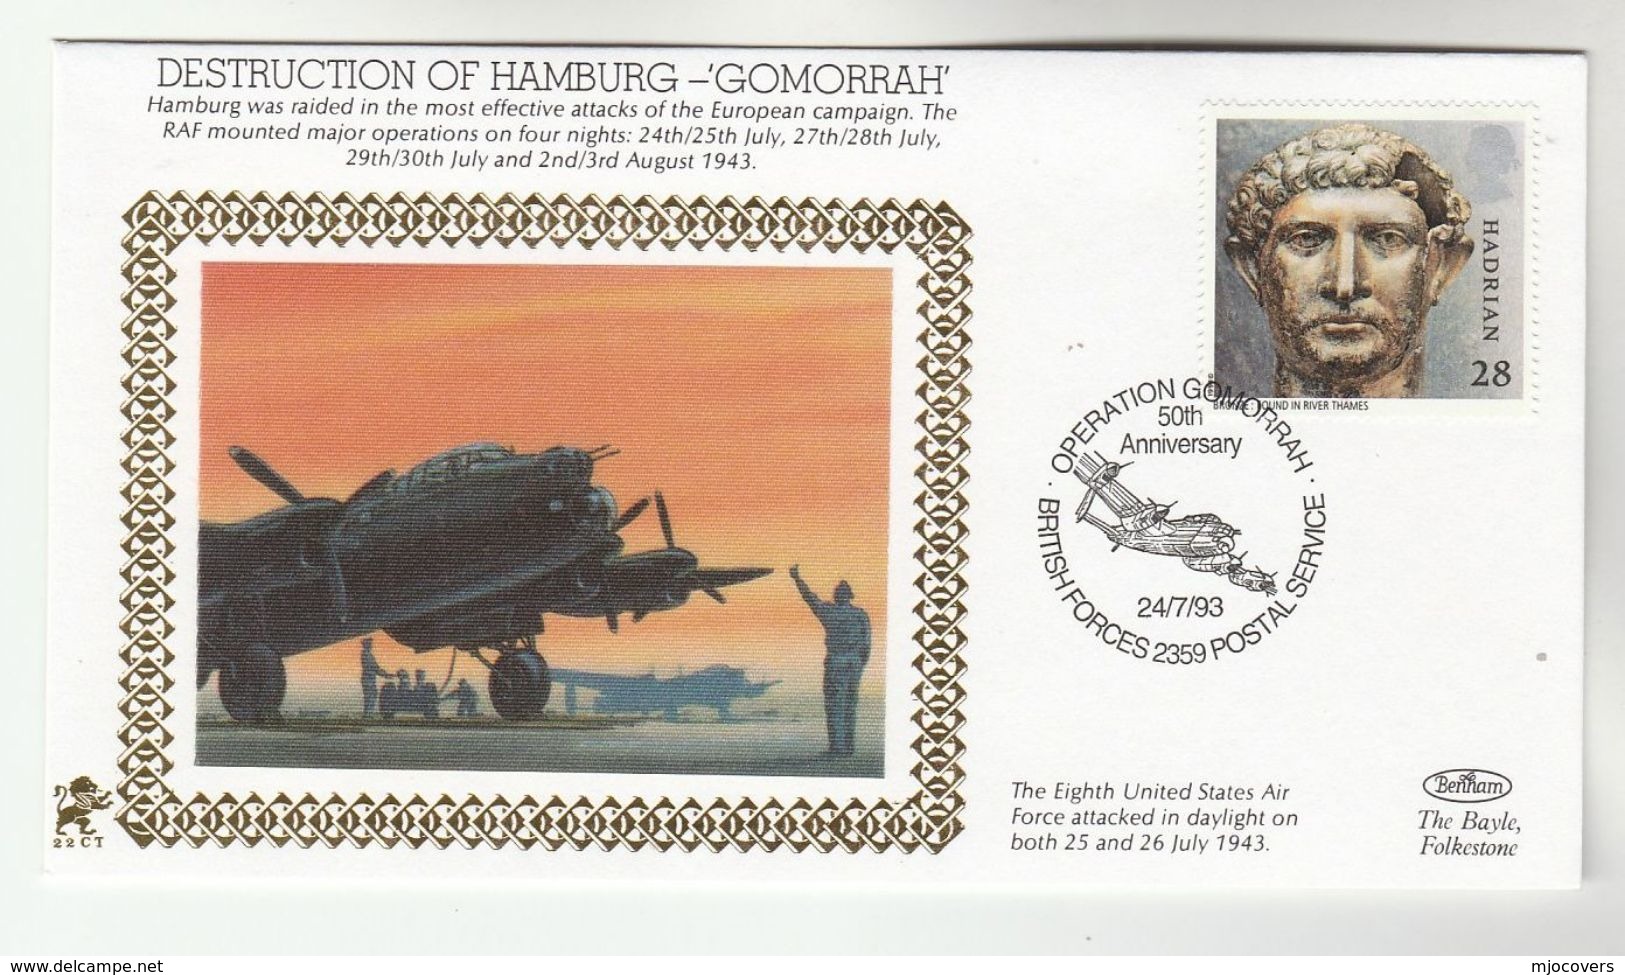 1993 GB Very Ltd EDITION COVER Anniv HAMBURG DESTROYED By RAF BOMBING Wwii Event Stamp British Forces Aviation Germany - WW2